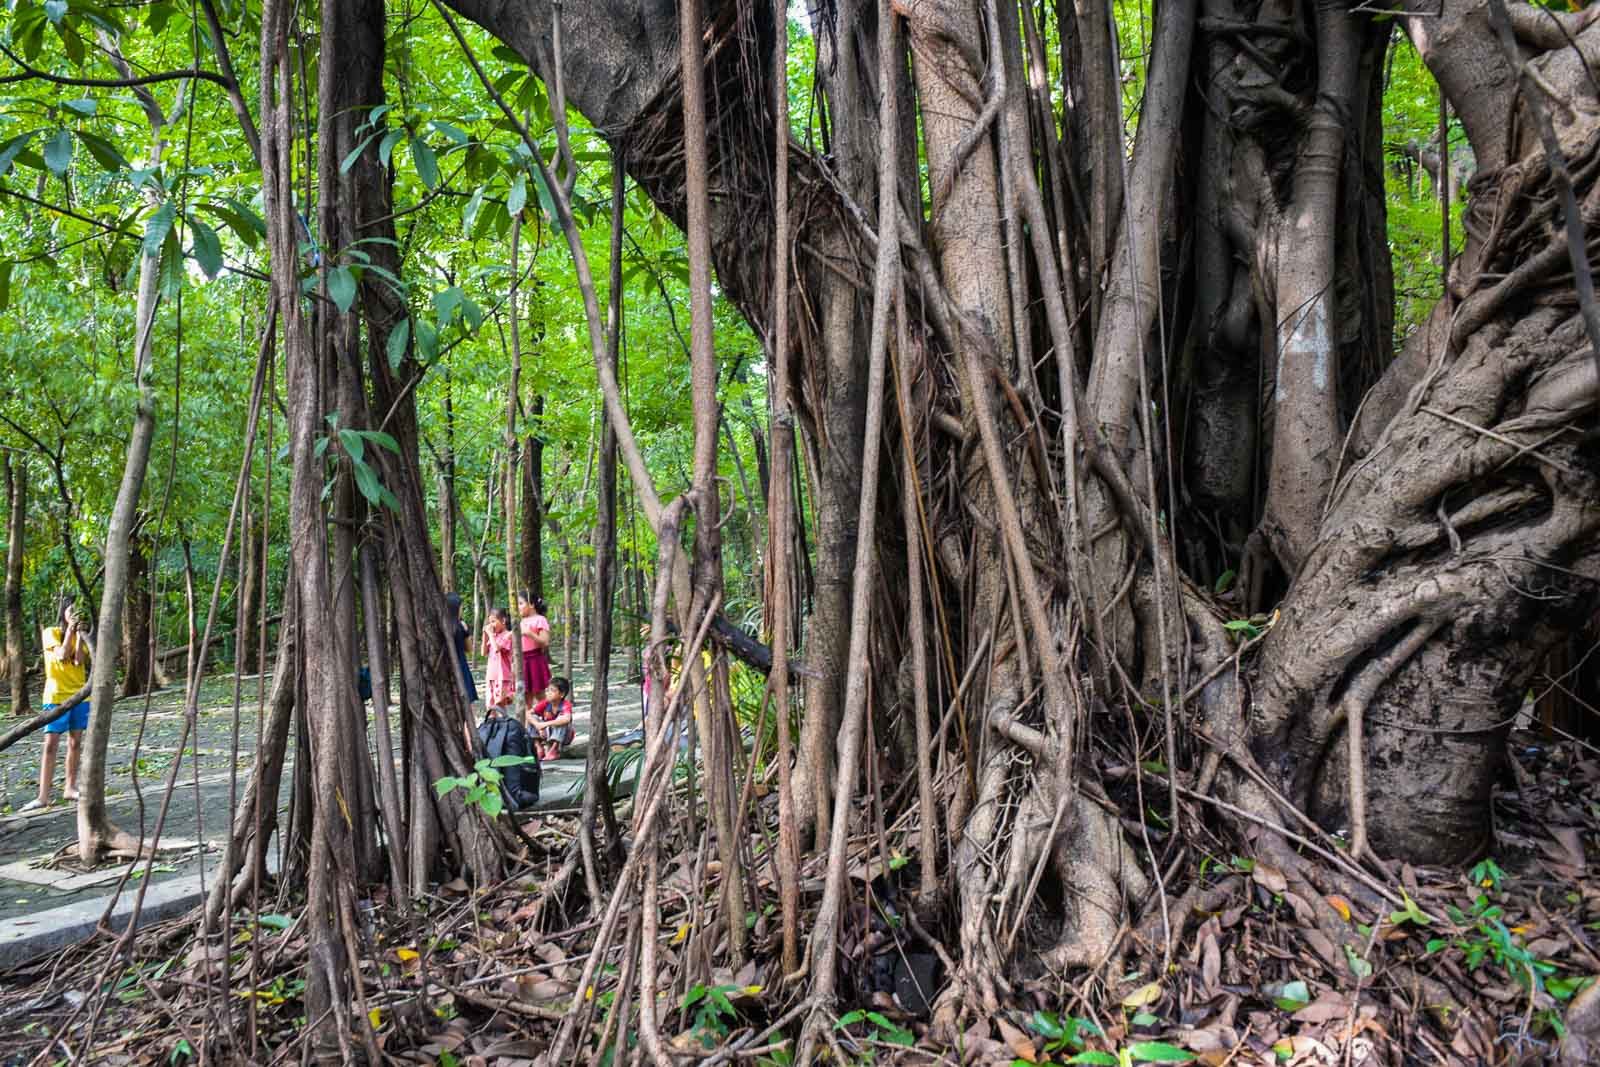 IN PHOTOS: An afternoon stroll inside Arroceros Forest Park